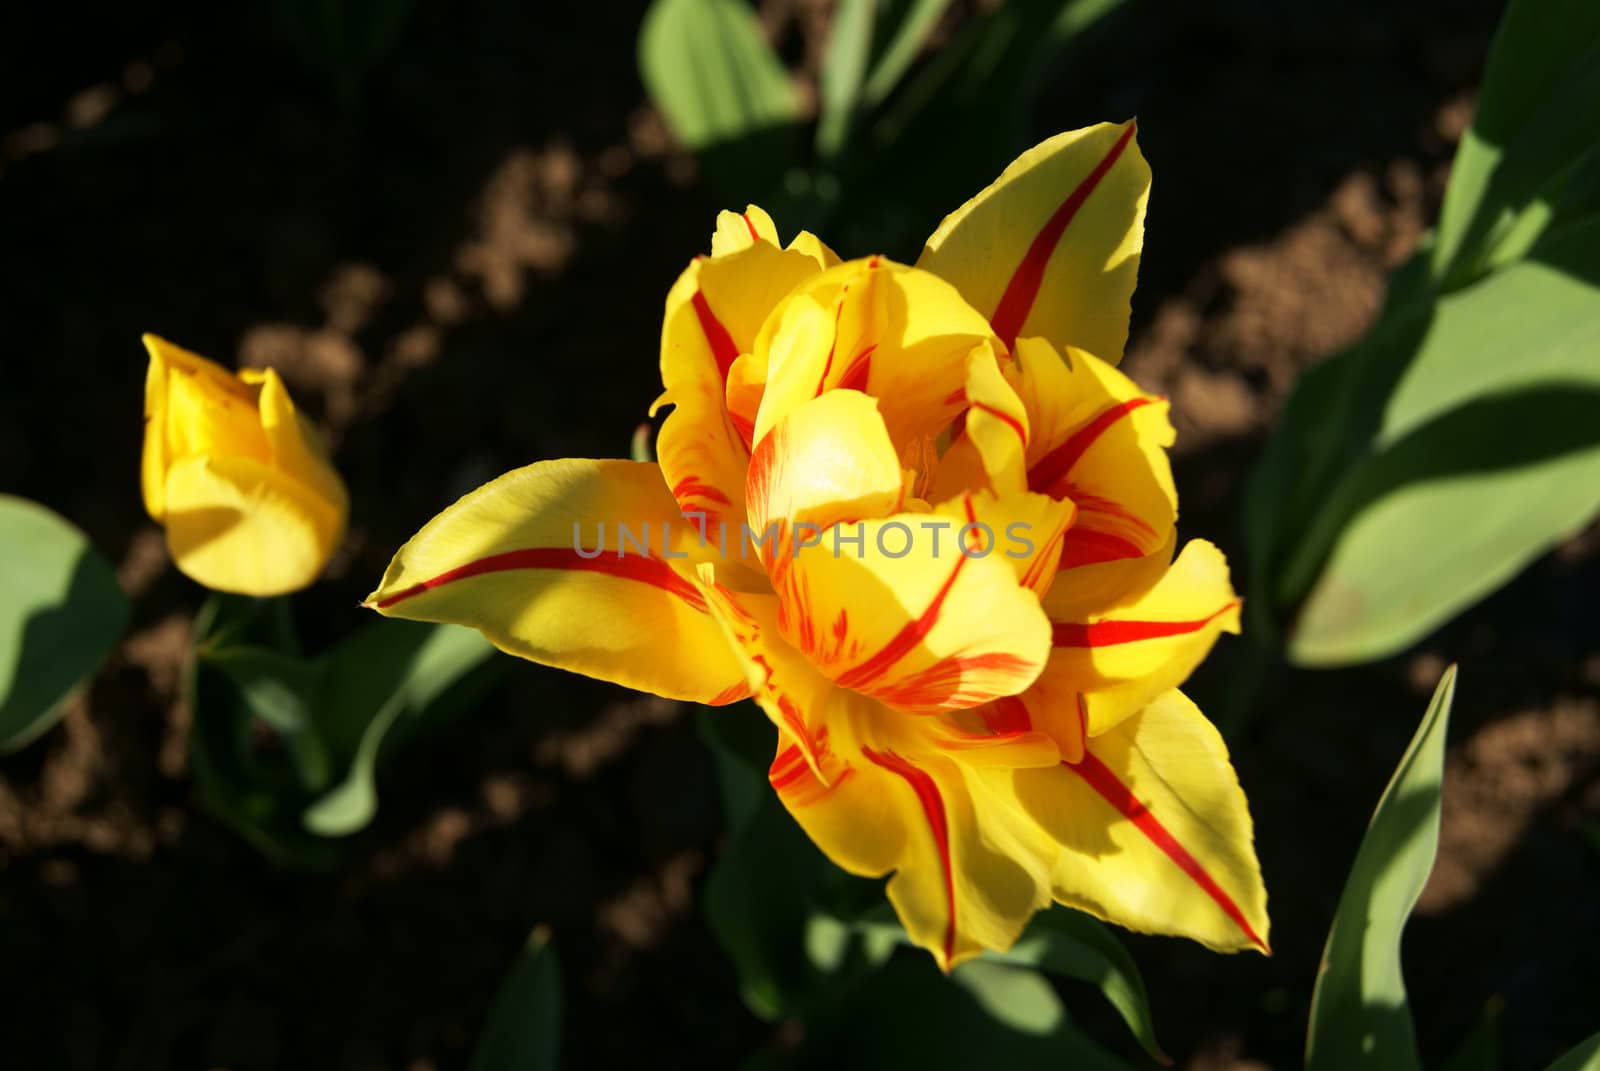 Stripped yellow and red double tulip